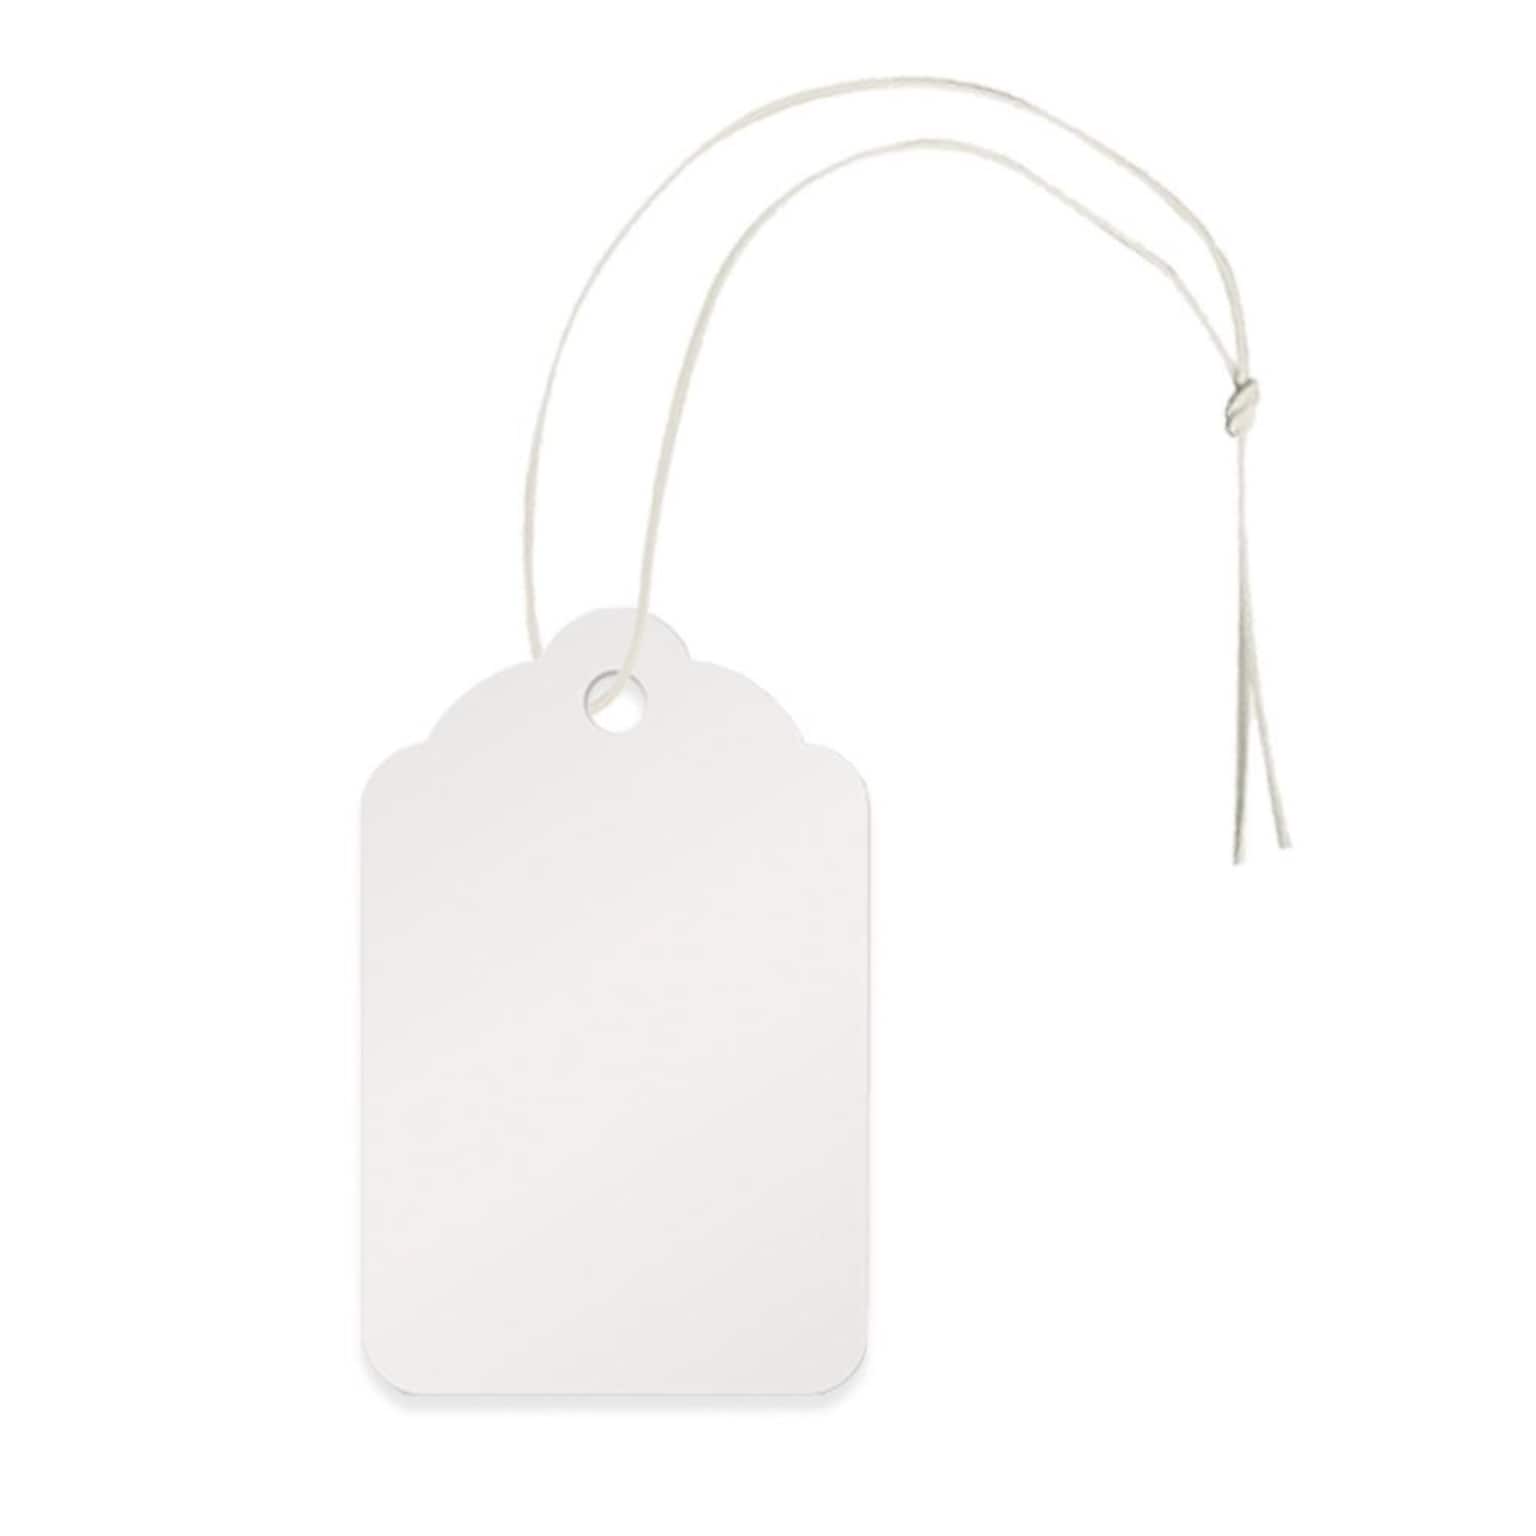 NAHANCO 1 x 1 1/2 Strung All Purpose Merchandise Tag, White, 1000/Pack